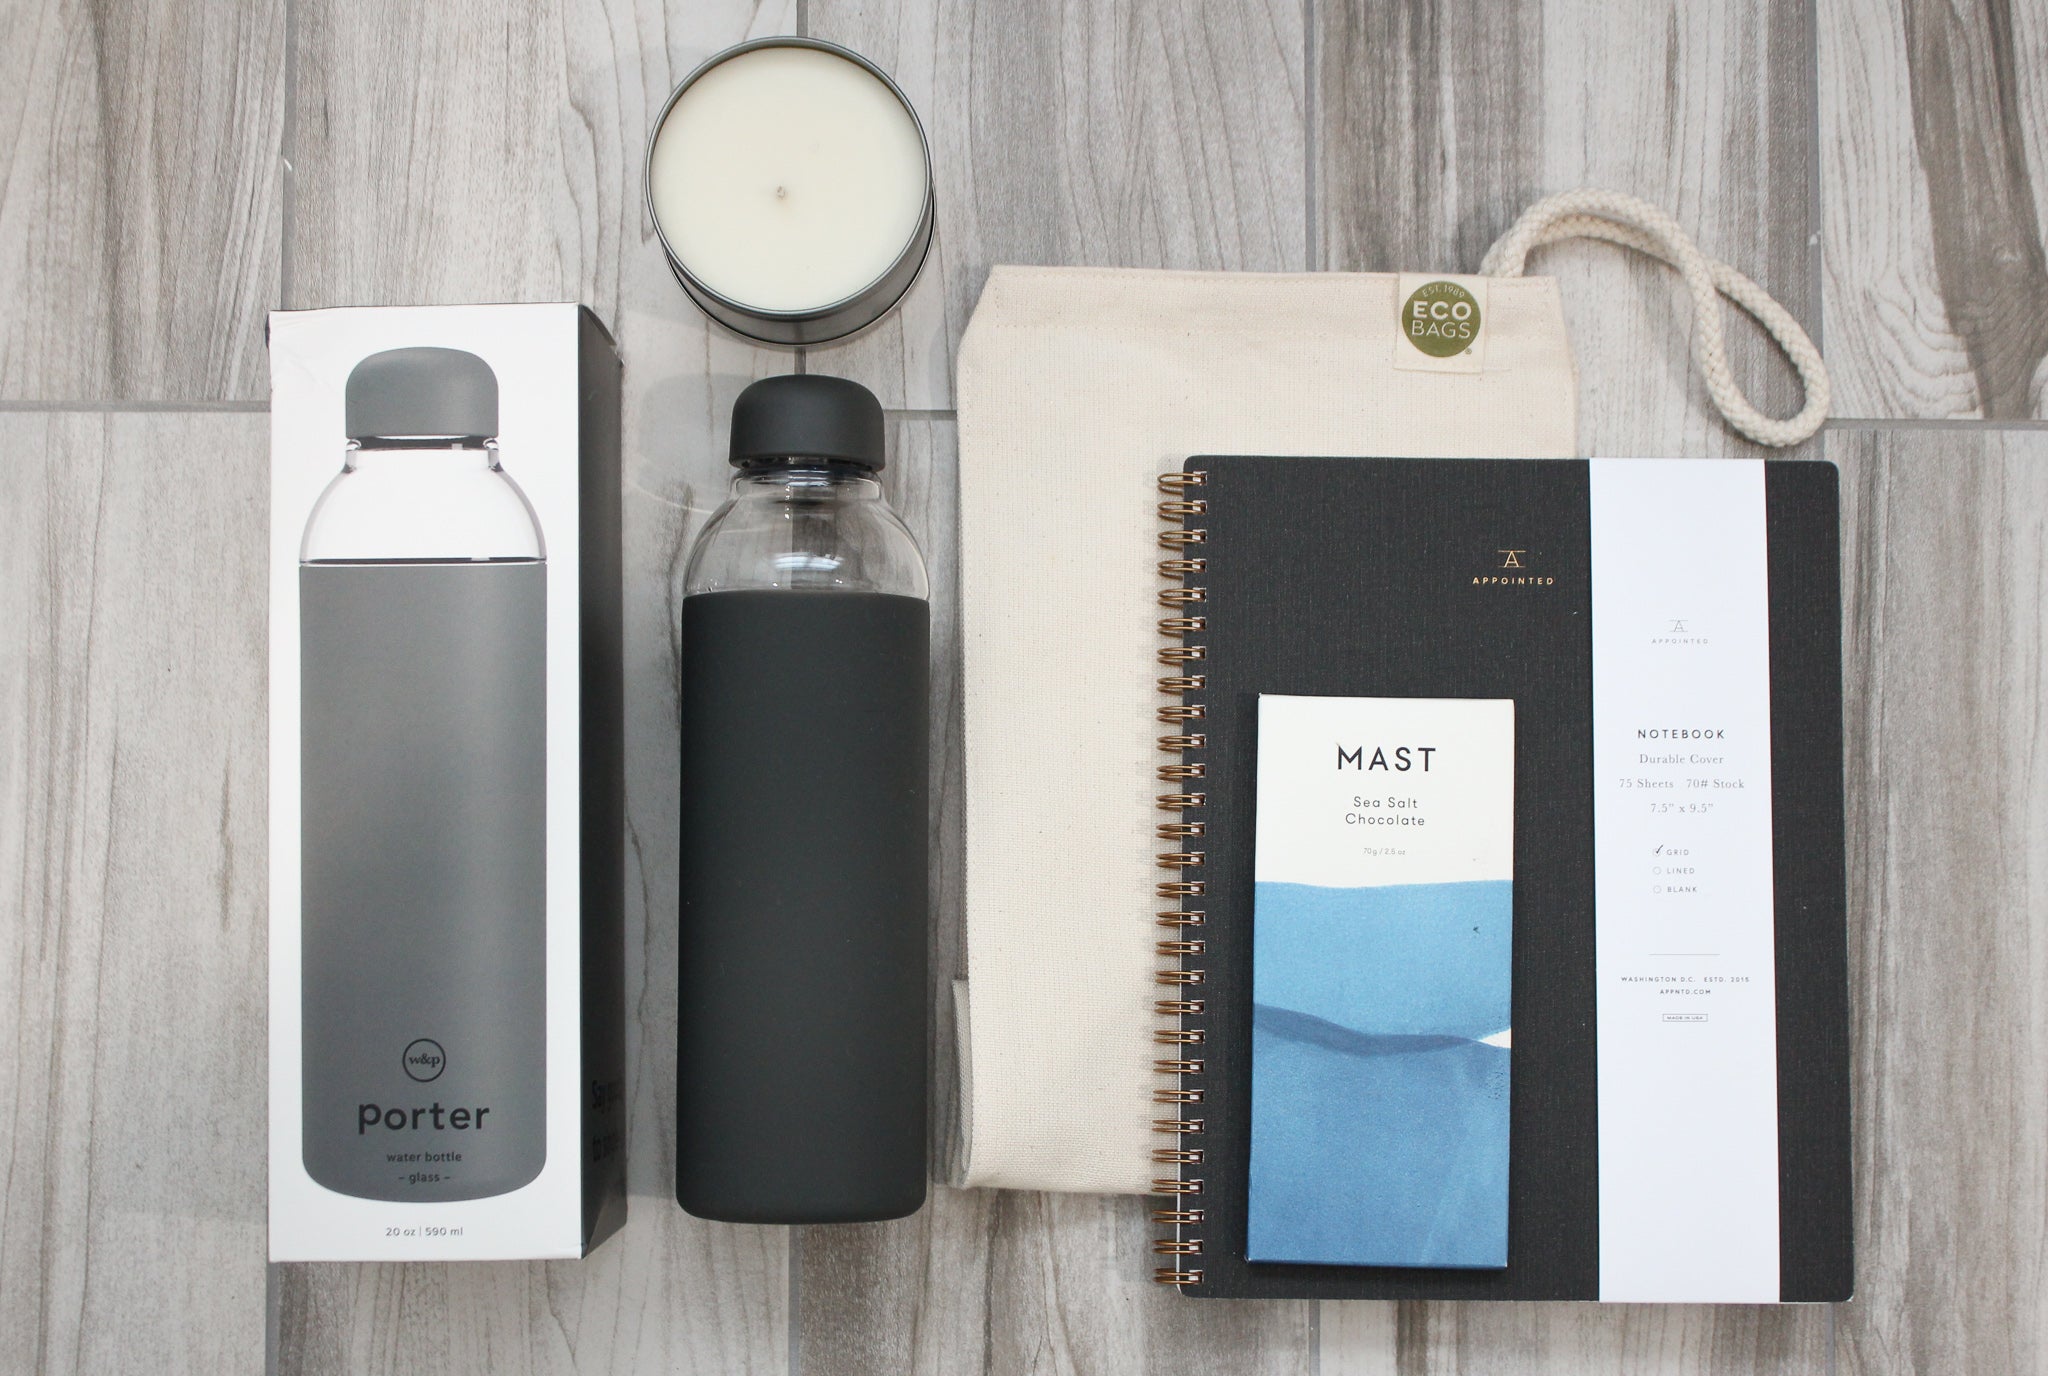 Lost in Thought Bundle: Appointed Canvas Journal, W&P Water Bottle, Candle Set